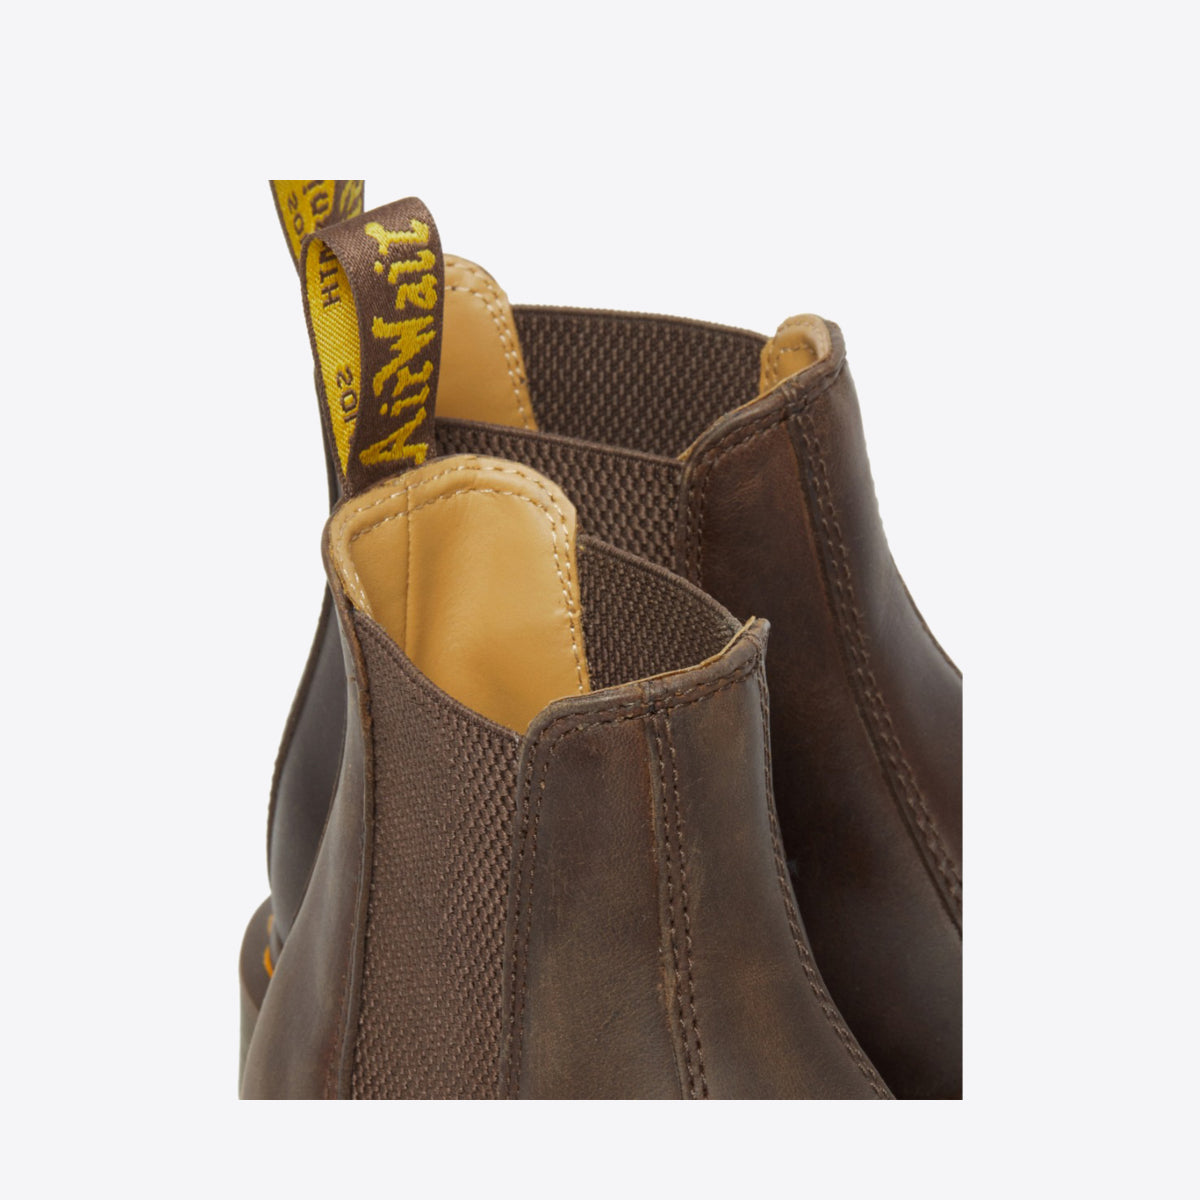 DR MARTENS 2976 Yellow Stitch Crazy Horse Chelsea Boot Dark Brown - Image 7